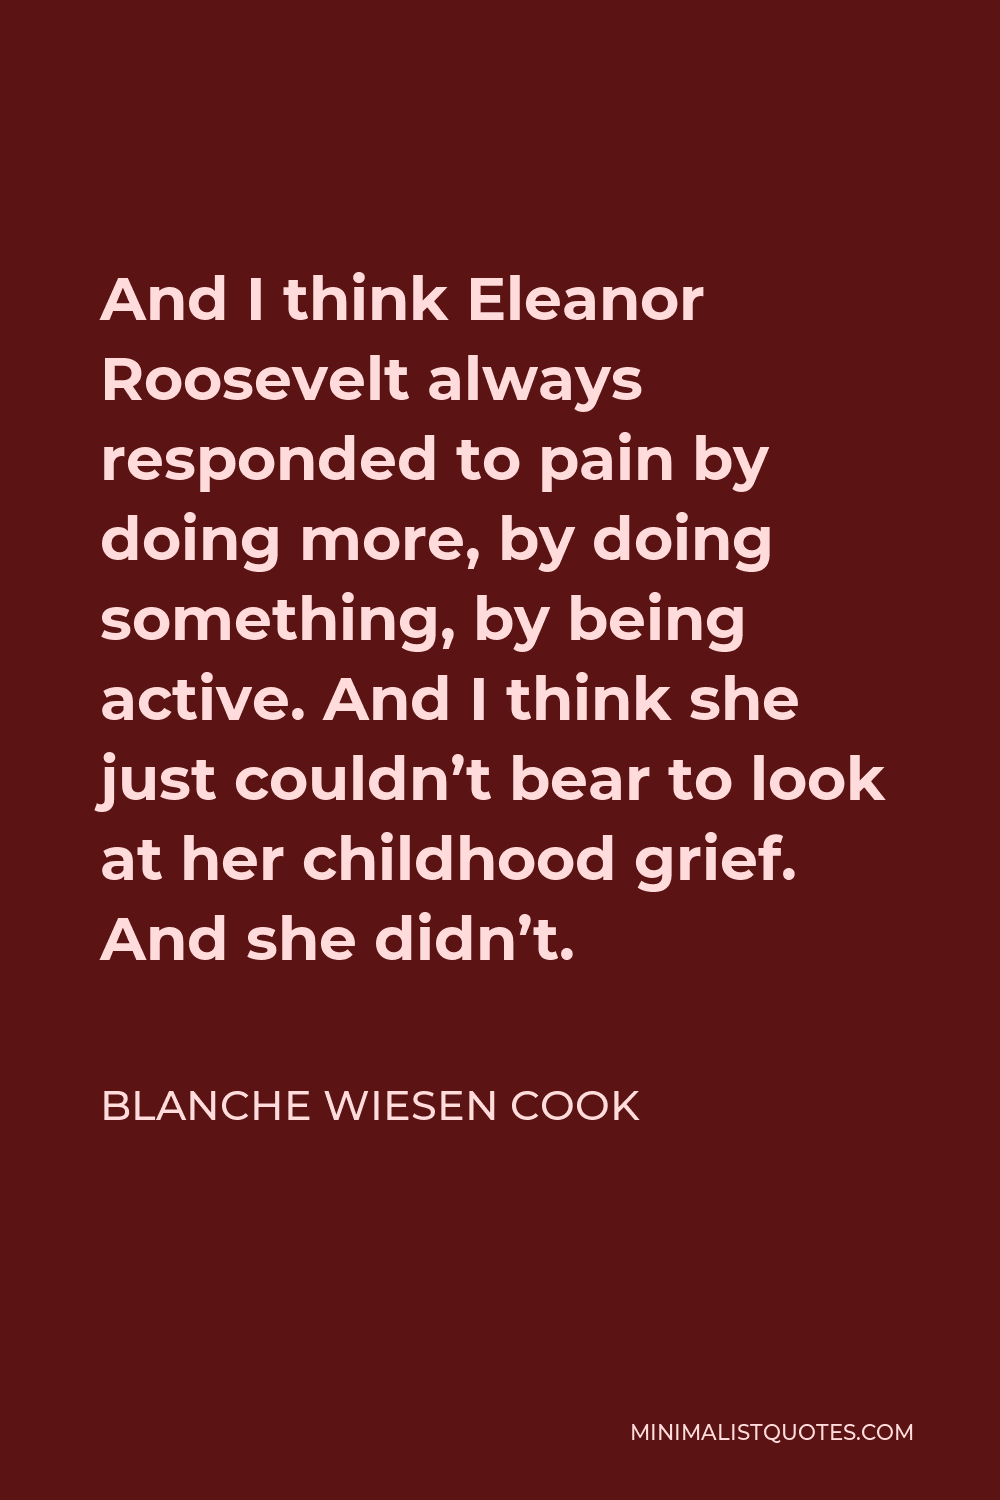 Blanche Wiesen Cook Quote - And I think Eleanor Roosevelt always responded to pain by doing more, by doing something, by being active. And I think she just couldn’t bear to look at her childhood grief. And she didn’t.